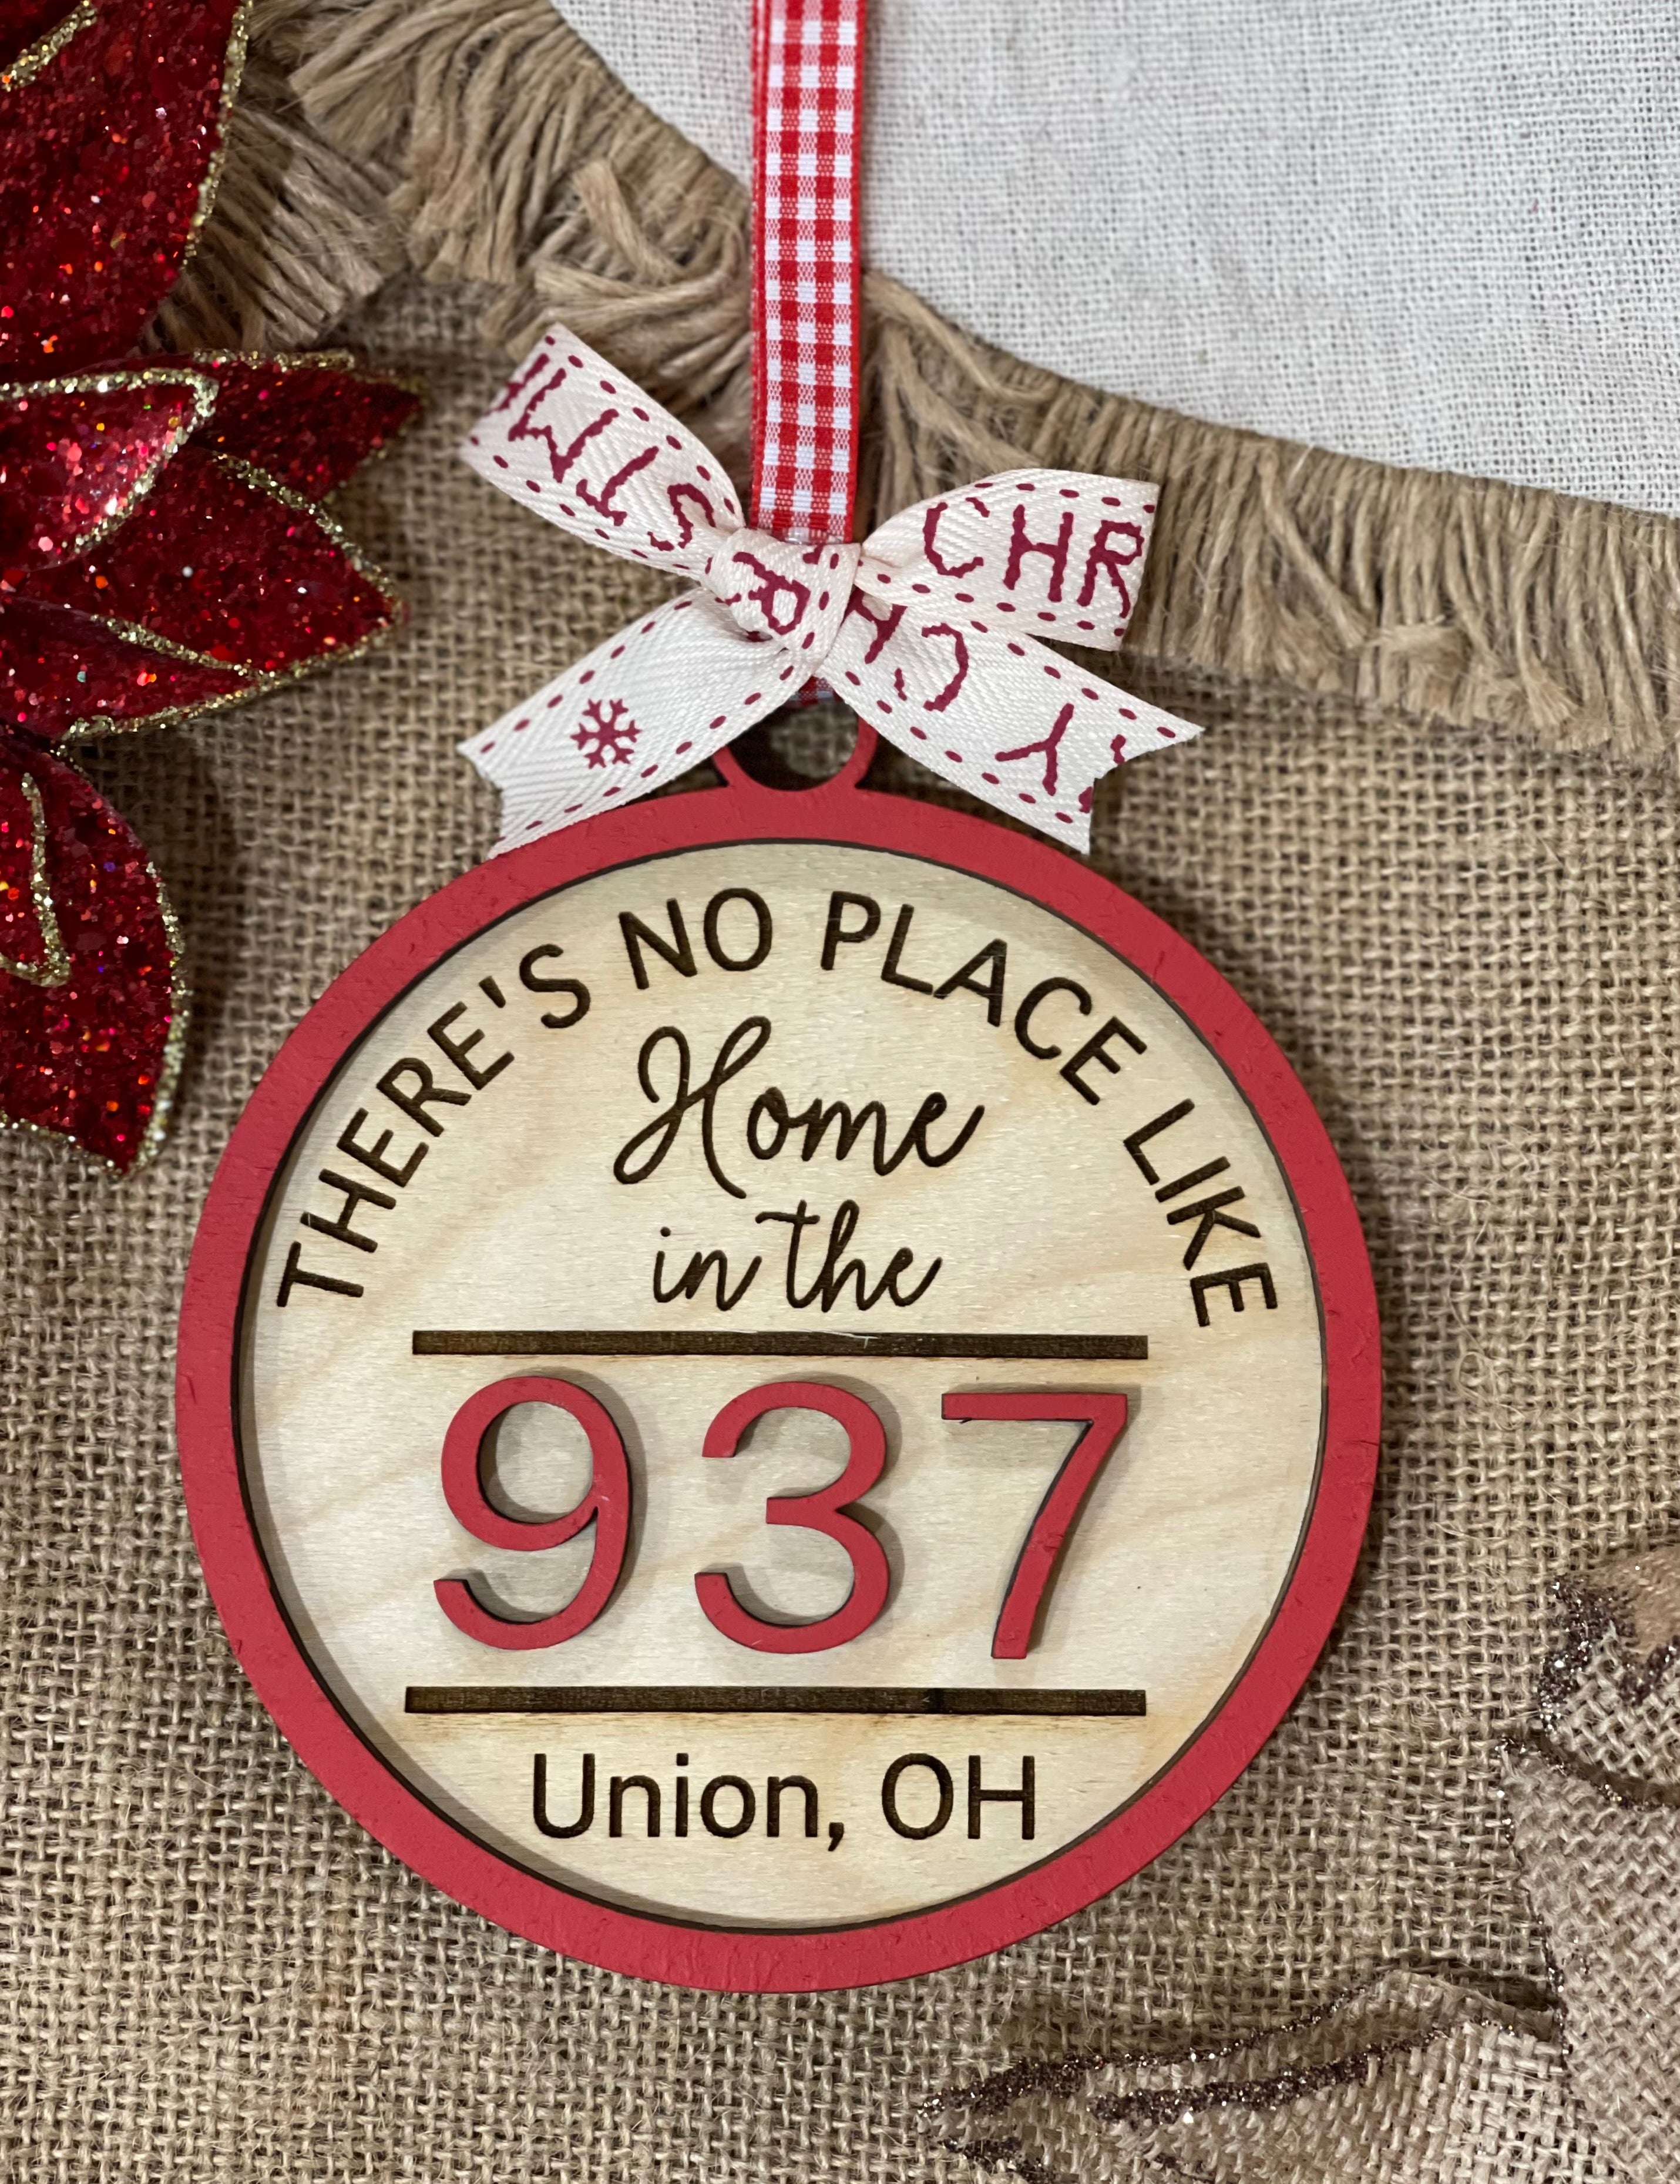 This is an alternate image of the area code ornament. 